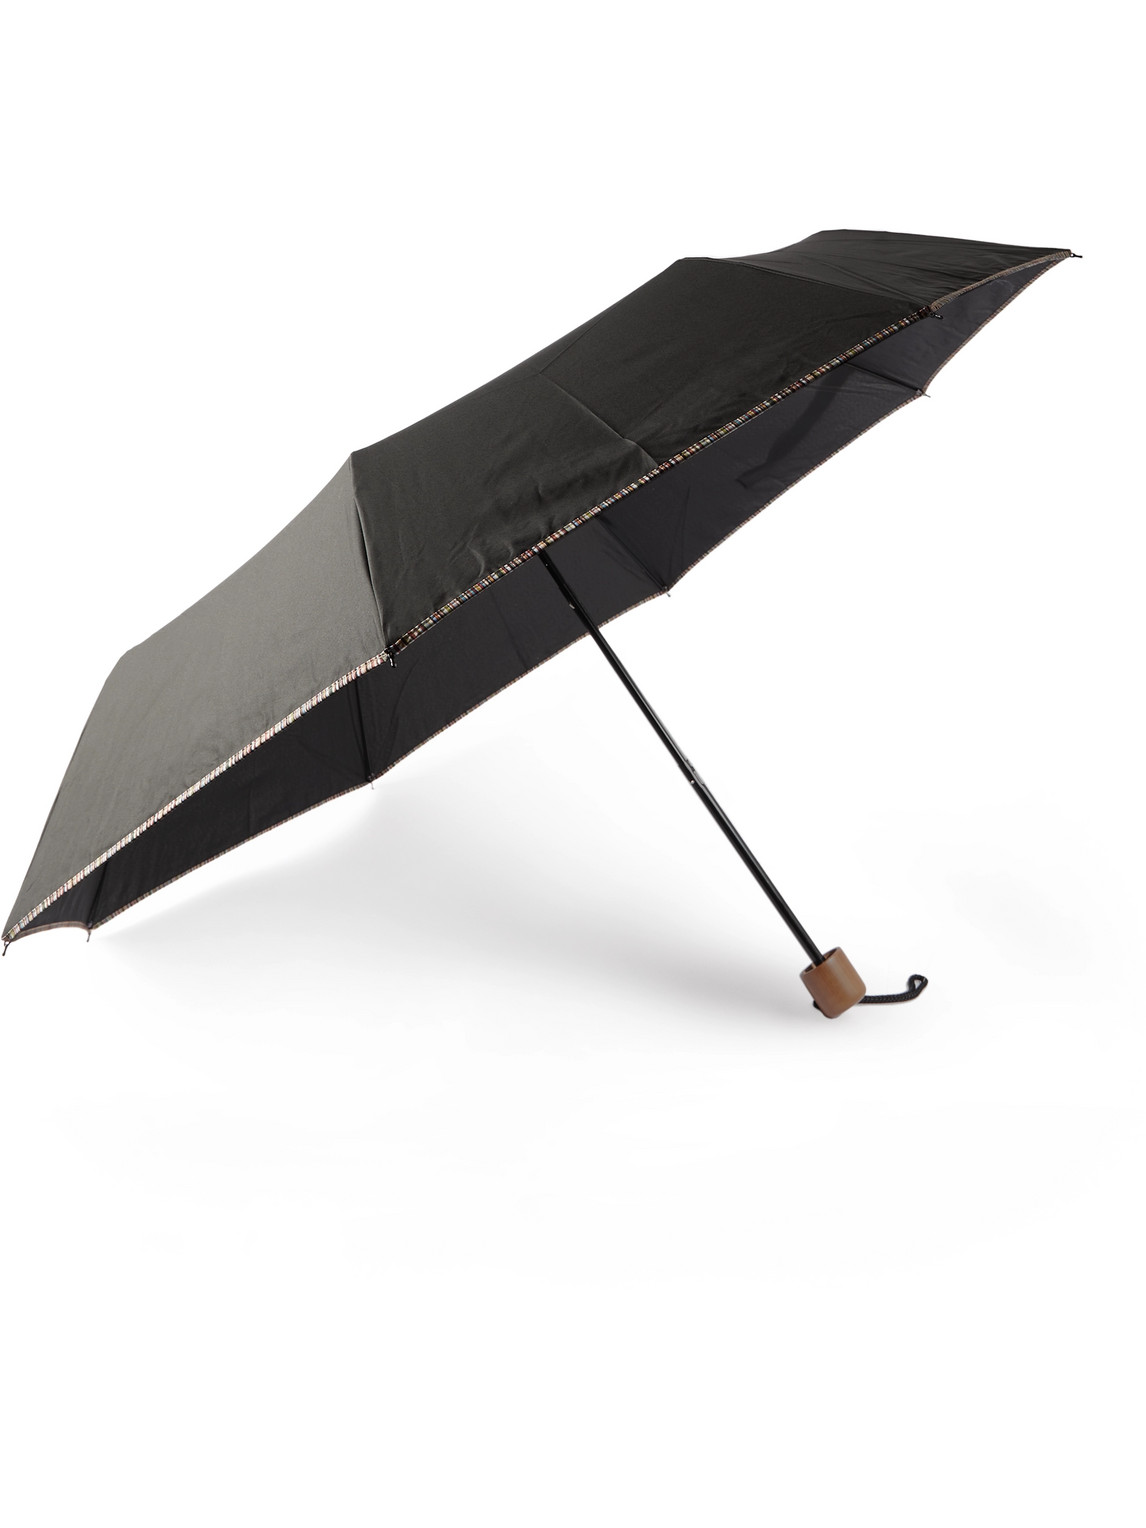 Contrast-Tipped Wood-Handle Fold-Up Umbrella